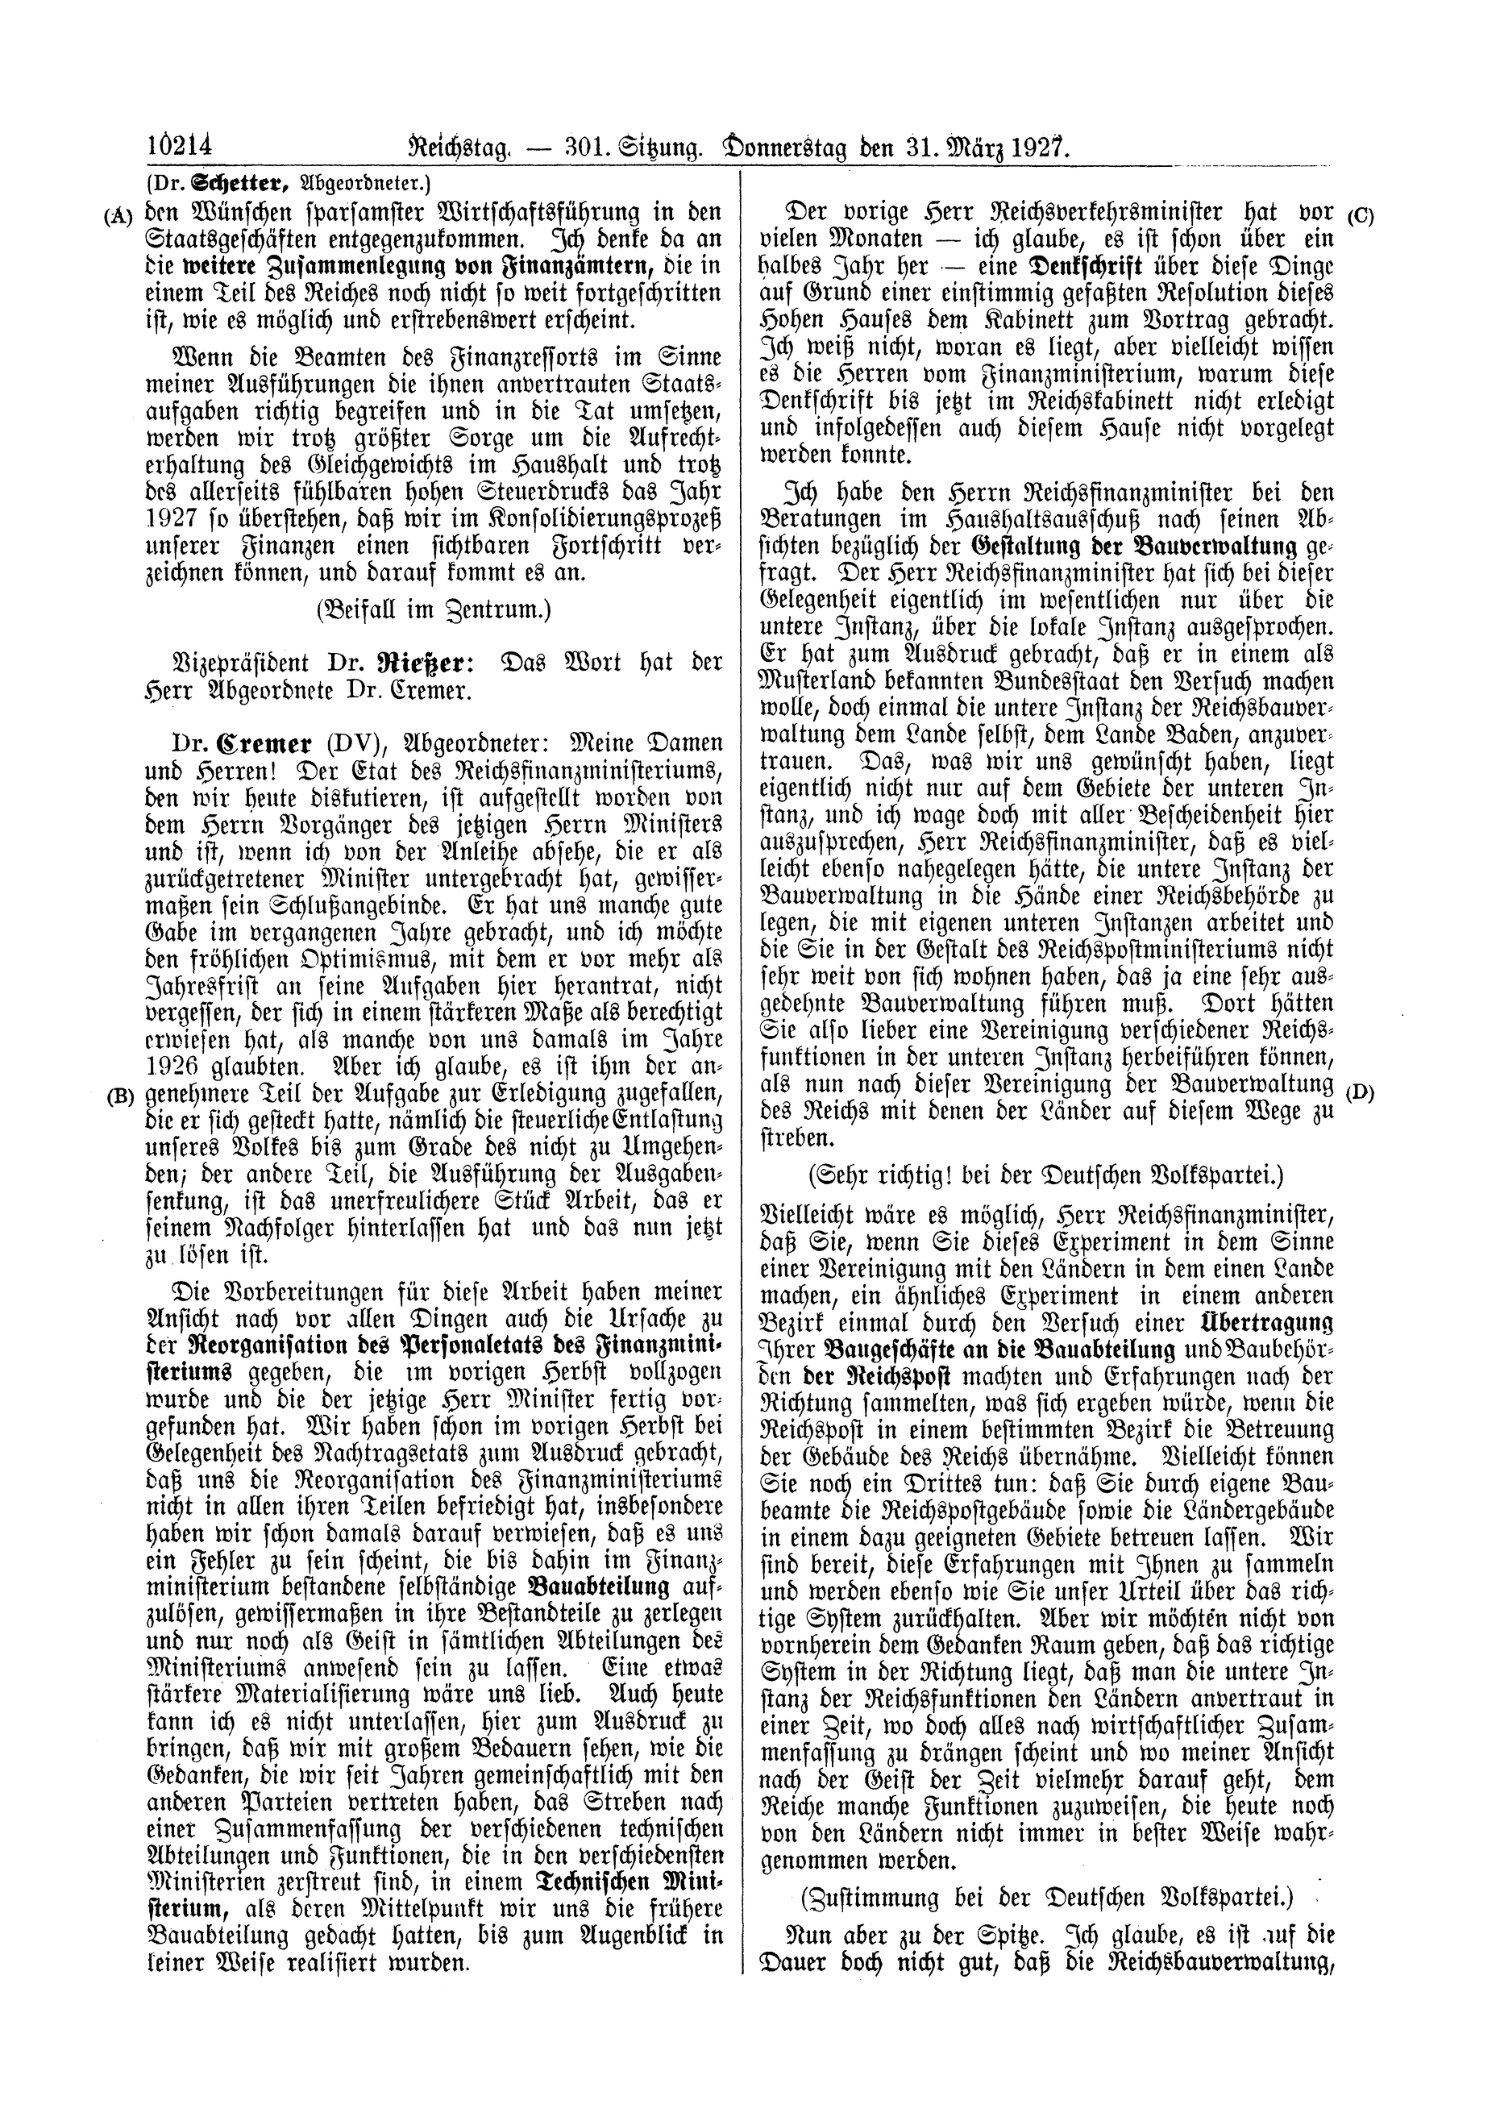 Scan of page 10214